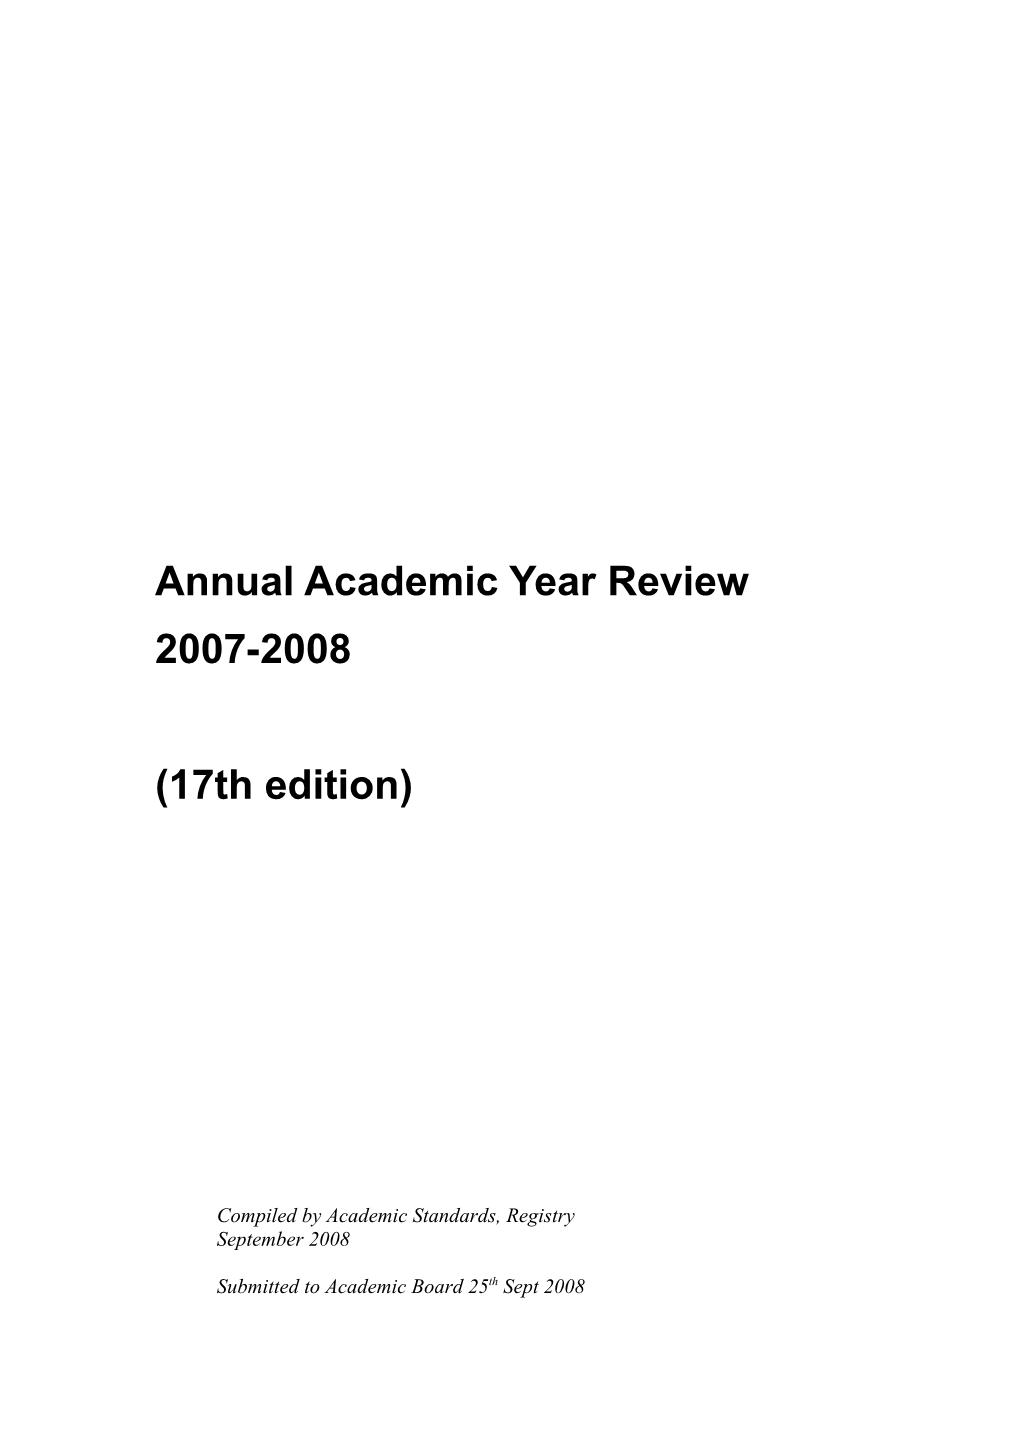 Annual Academic Year Review 2007-08